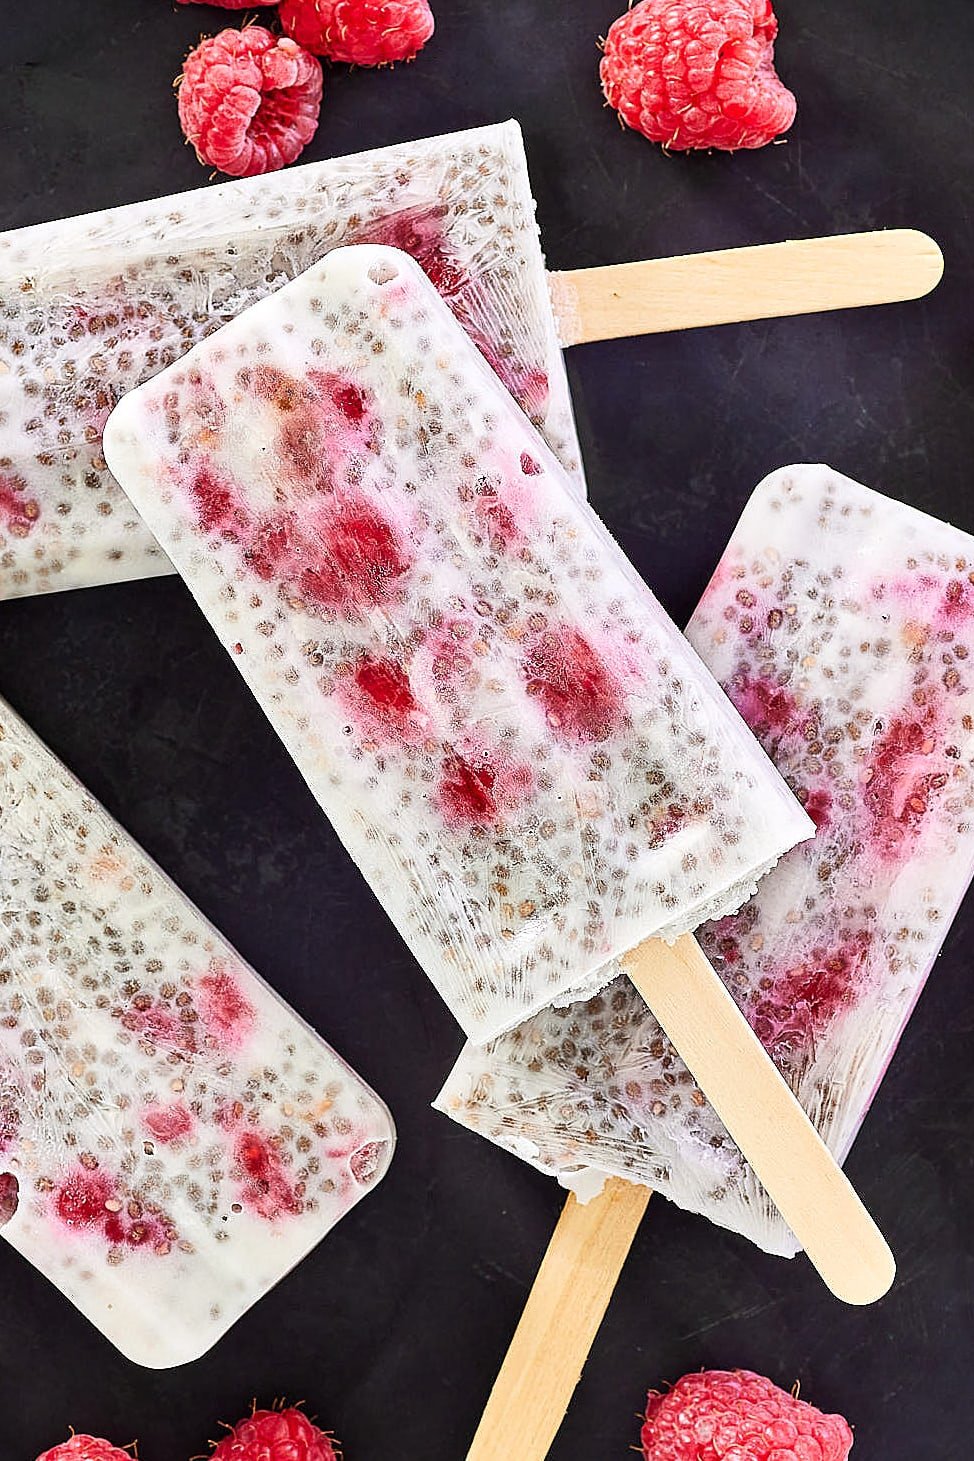 Raspberry Coconut Chia Seed Pudding Pops